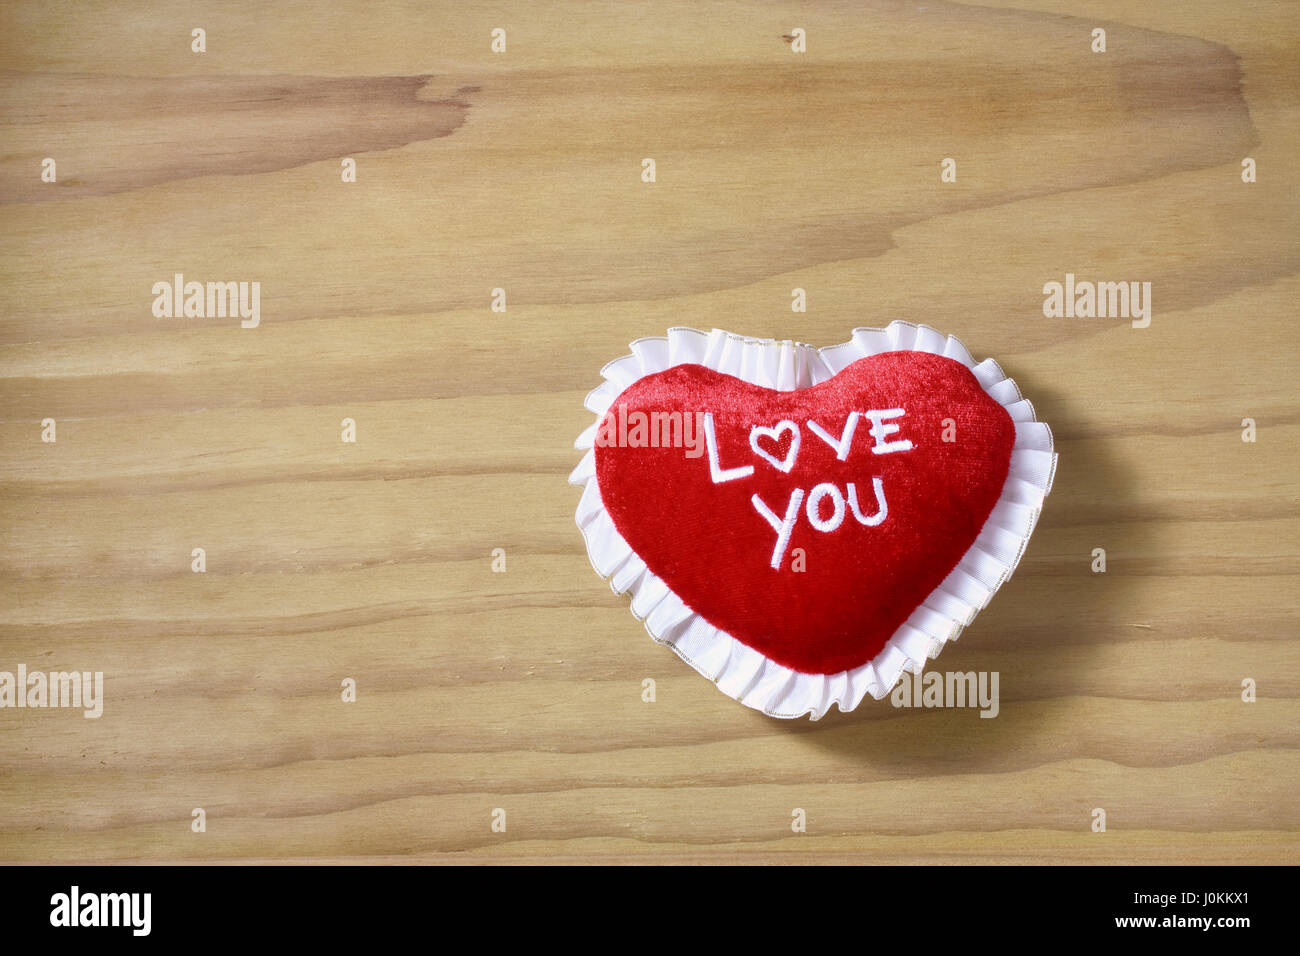 Love Heart on Wooden Background Stock Photo